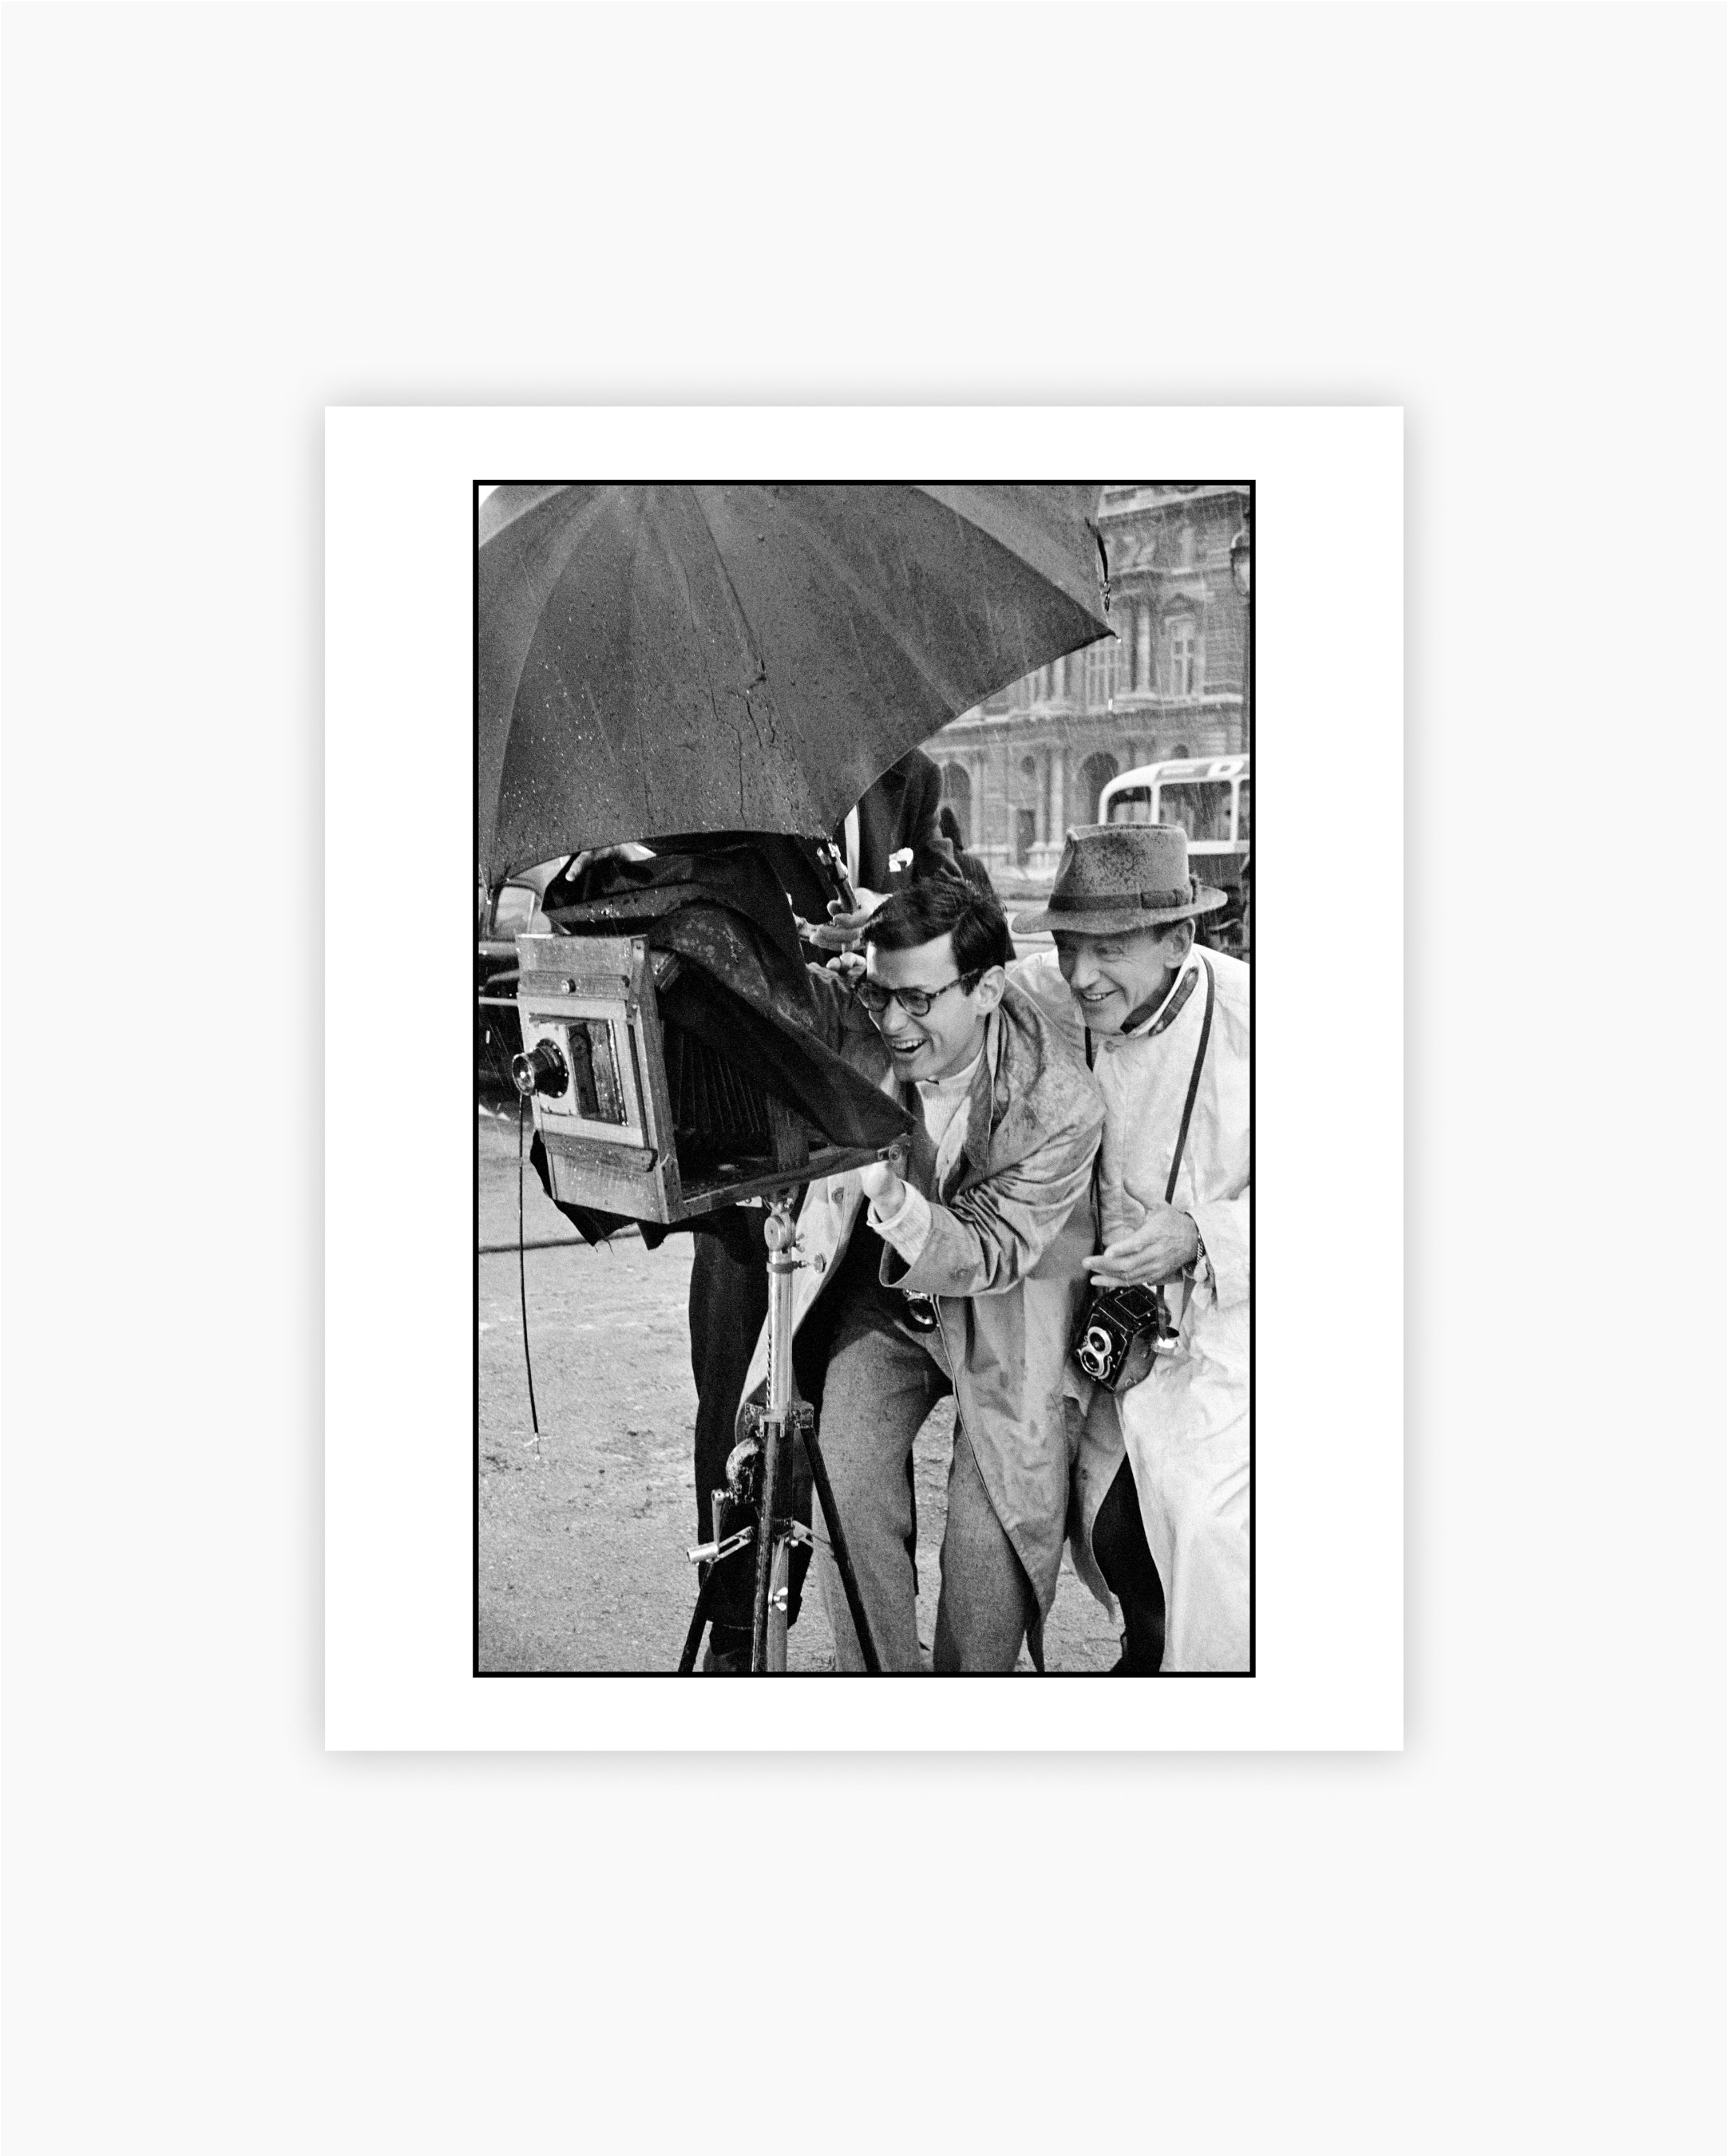 Magnum Editions: Fred Astaire & Richard Avedon. Paris, France